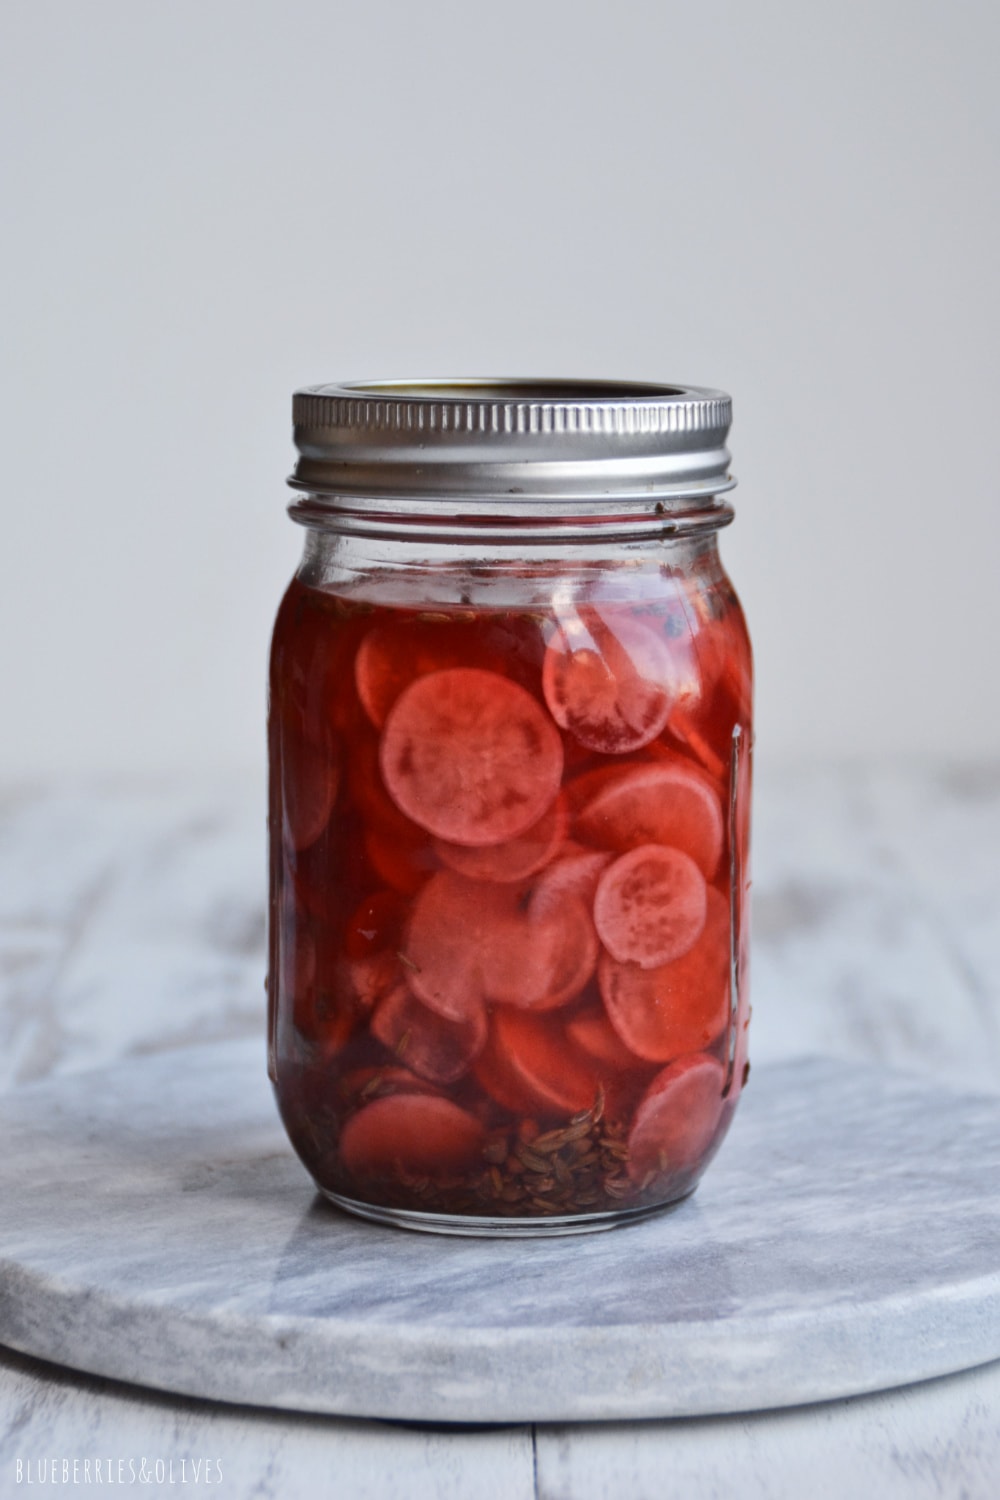 PICKLED RADISHES IN A GLASS JAR WITH LID, WHITE MARBLE CUTTING BOARD AND WHITE BACKGROUND